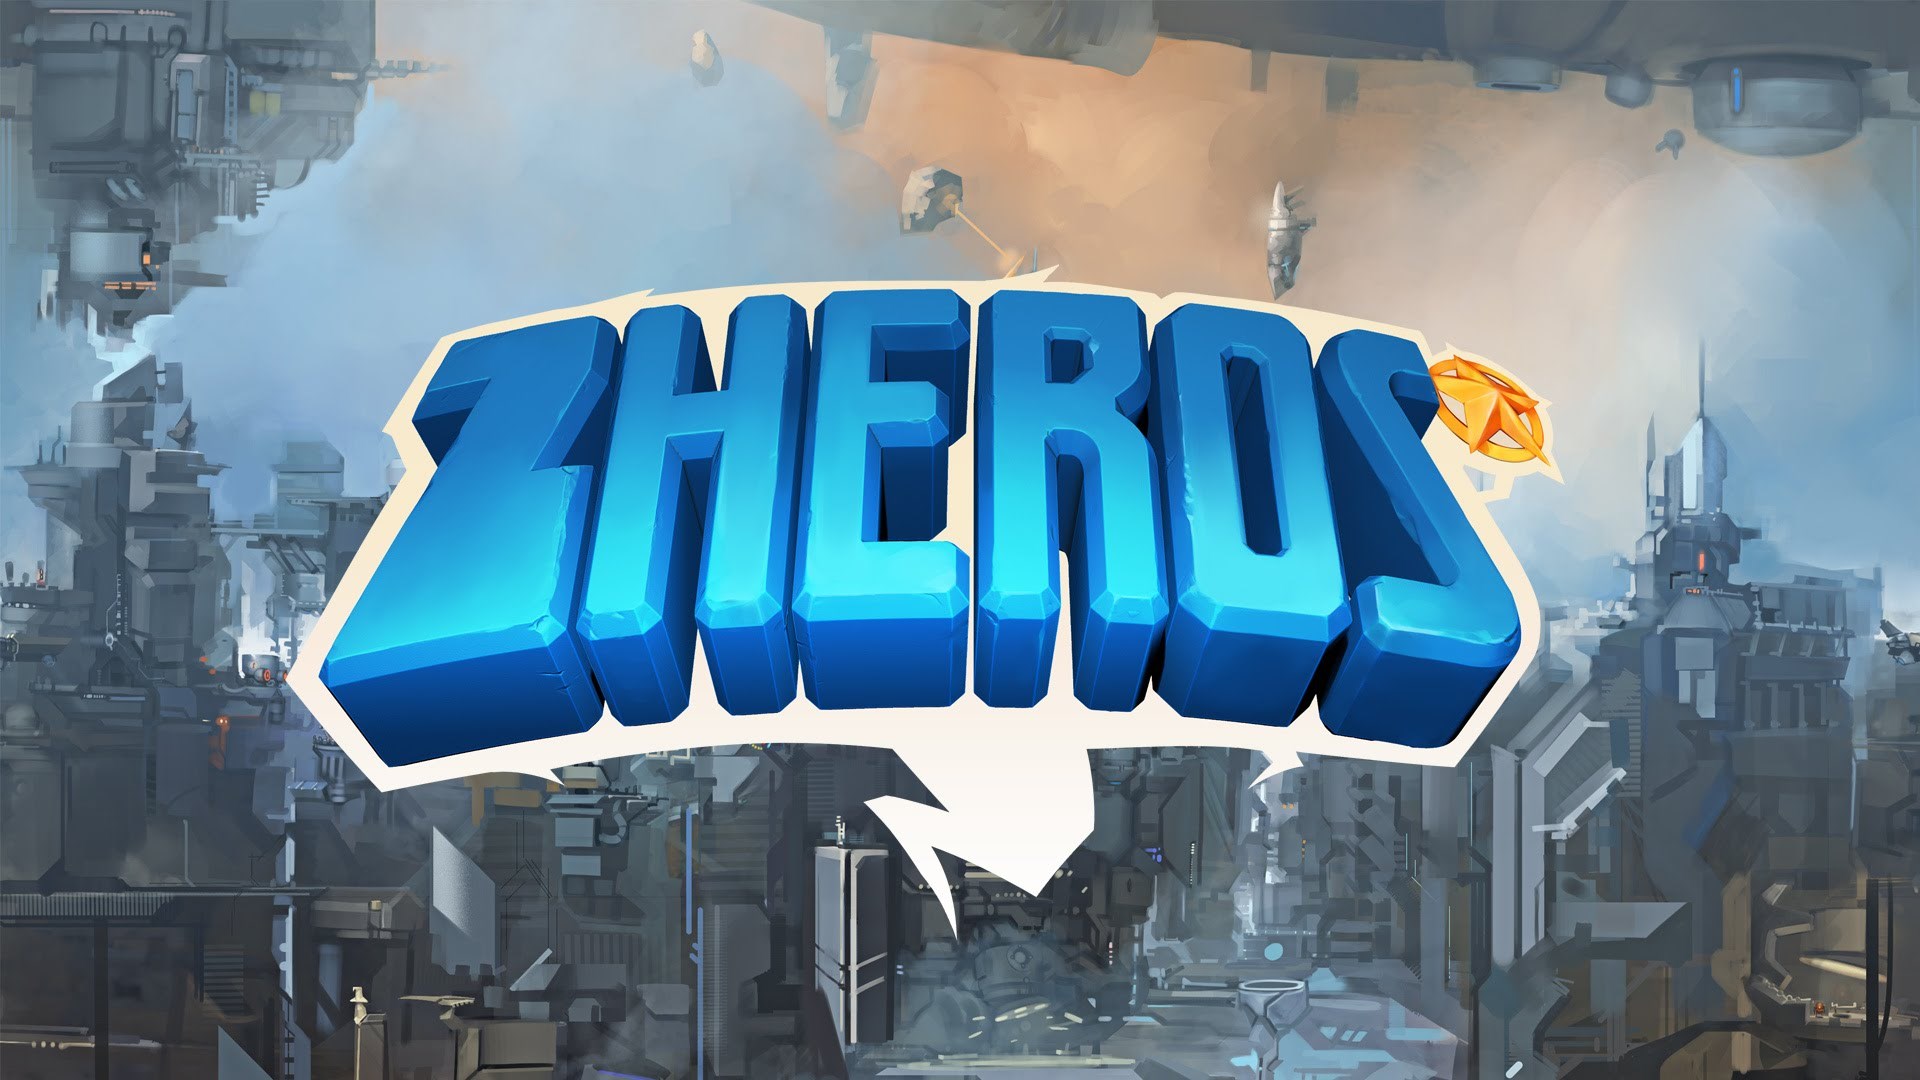 ZHEROS Backgrounds, Compatible - PC, Mobile, Gadgets| 1920x1080 px